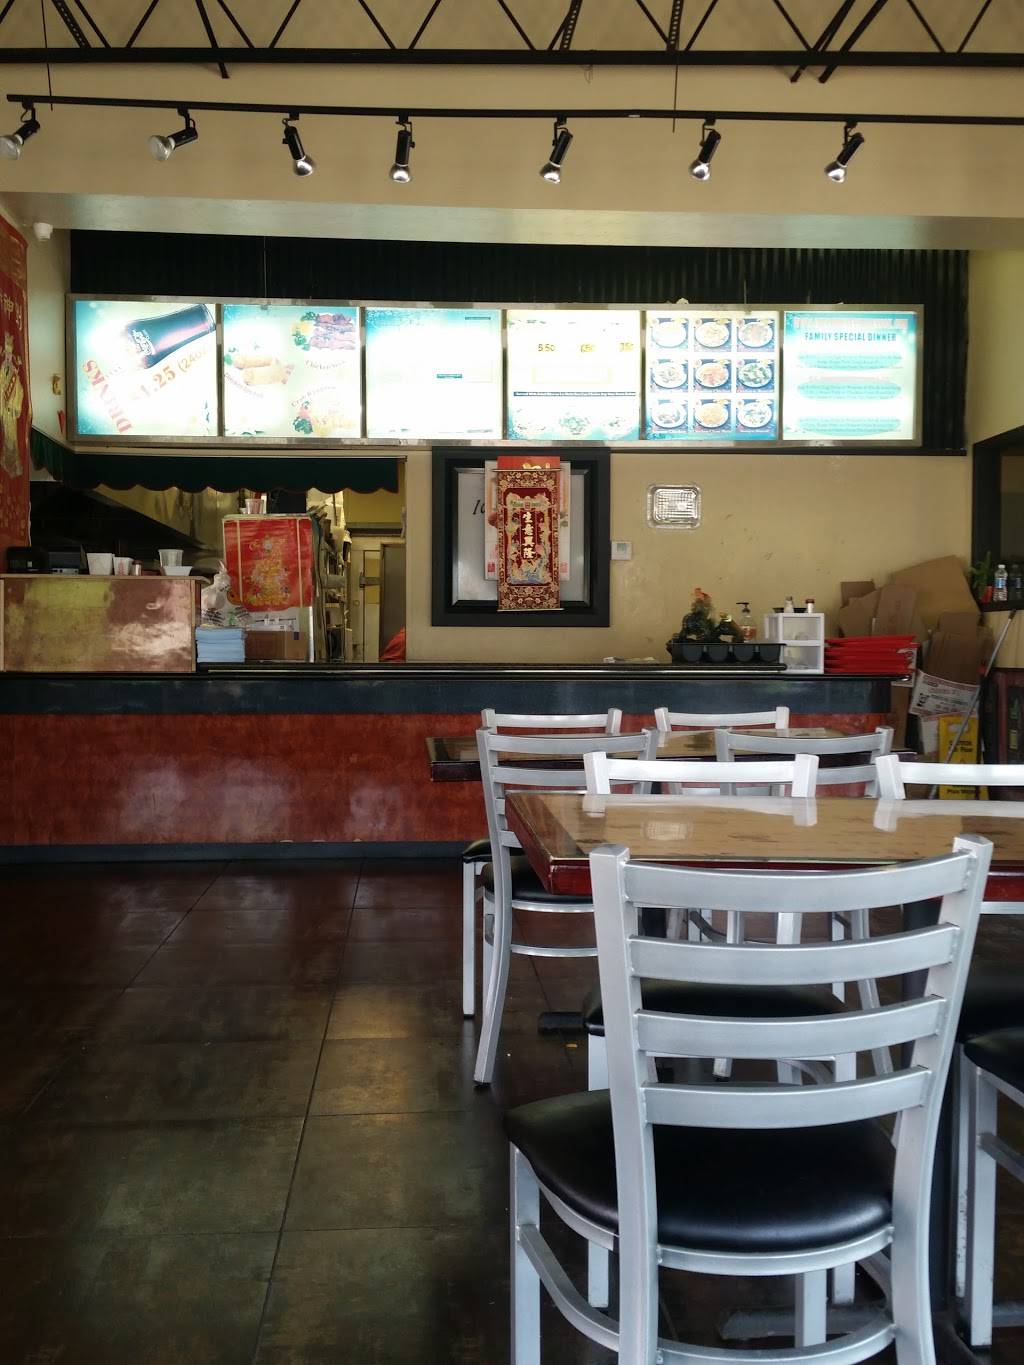 China House Express | meal delivery | 1318 W Britton Rd, Oklahoma City, OK 73114, USA | 4058435818 OR +1 405-843-5818